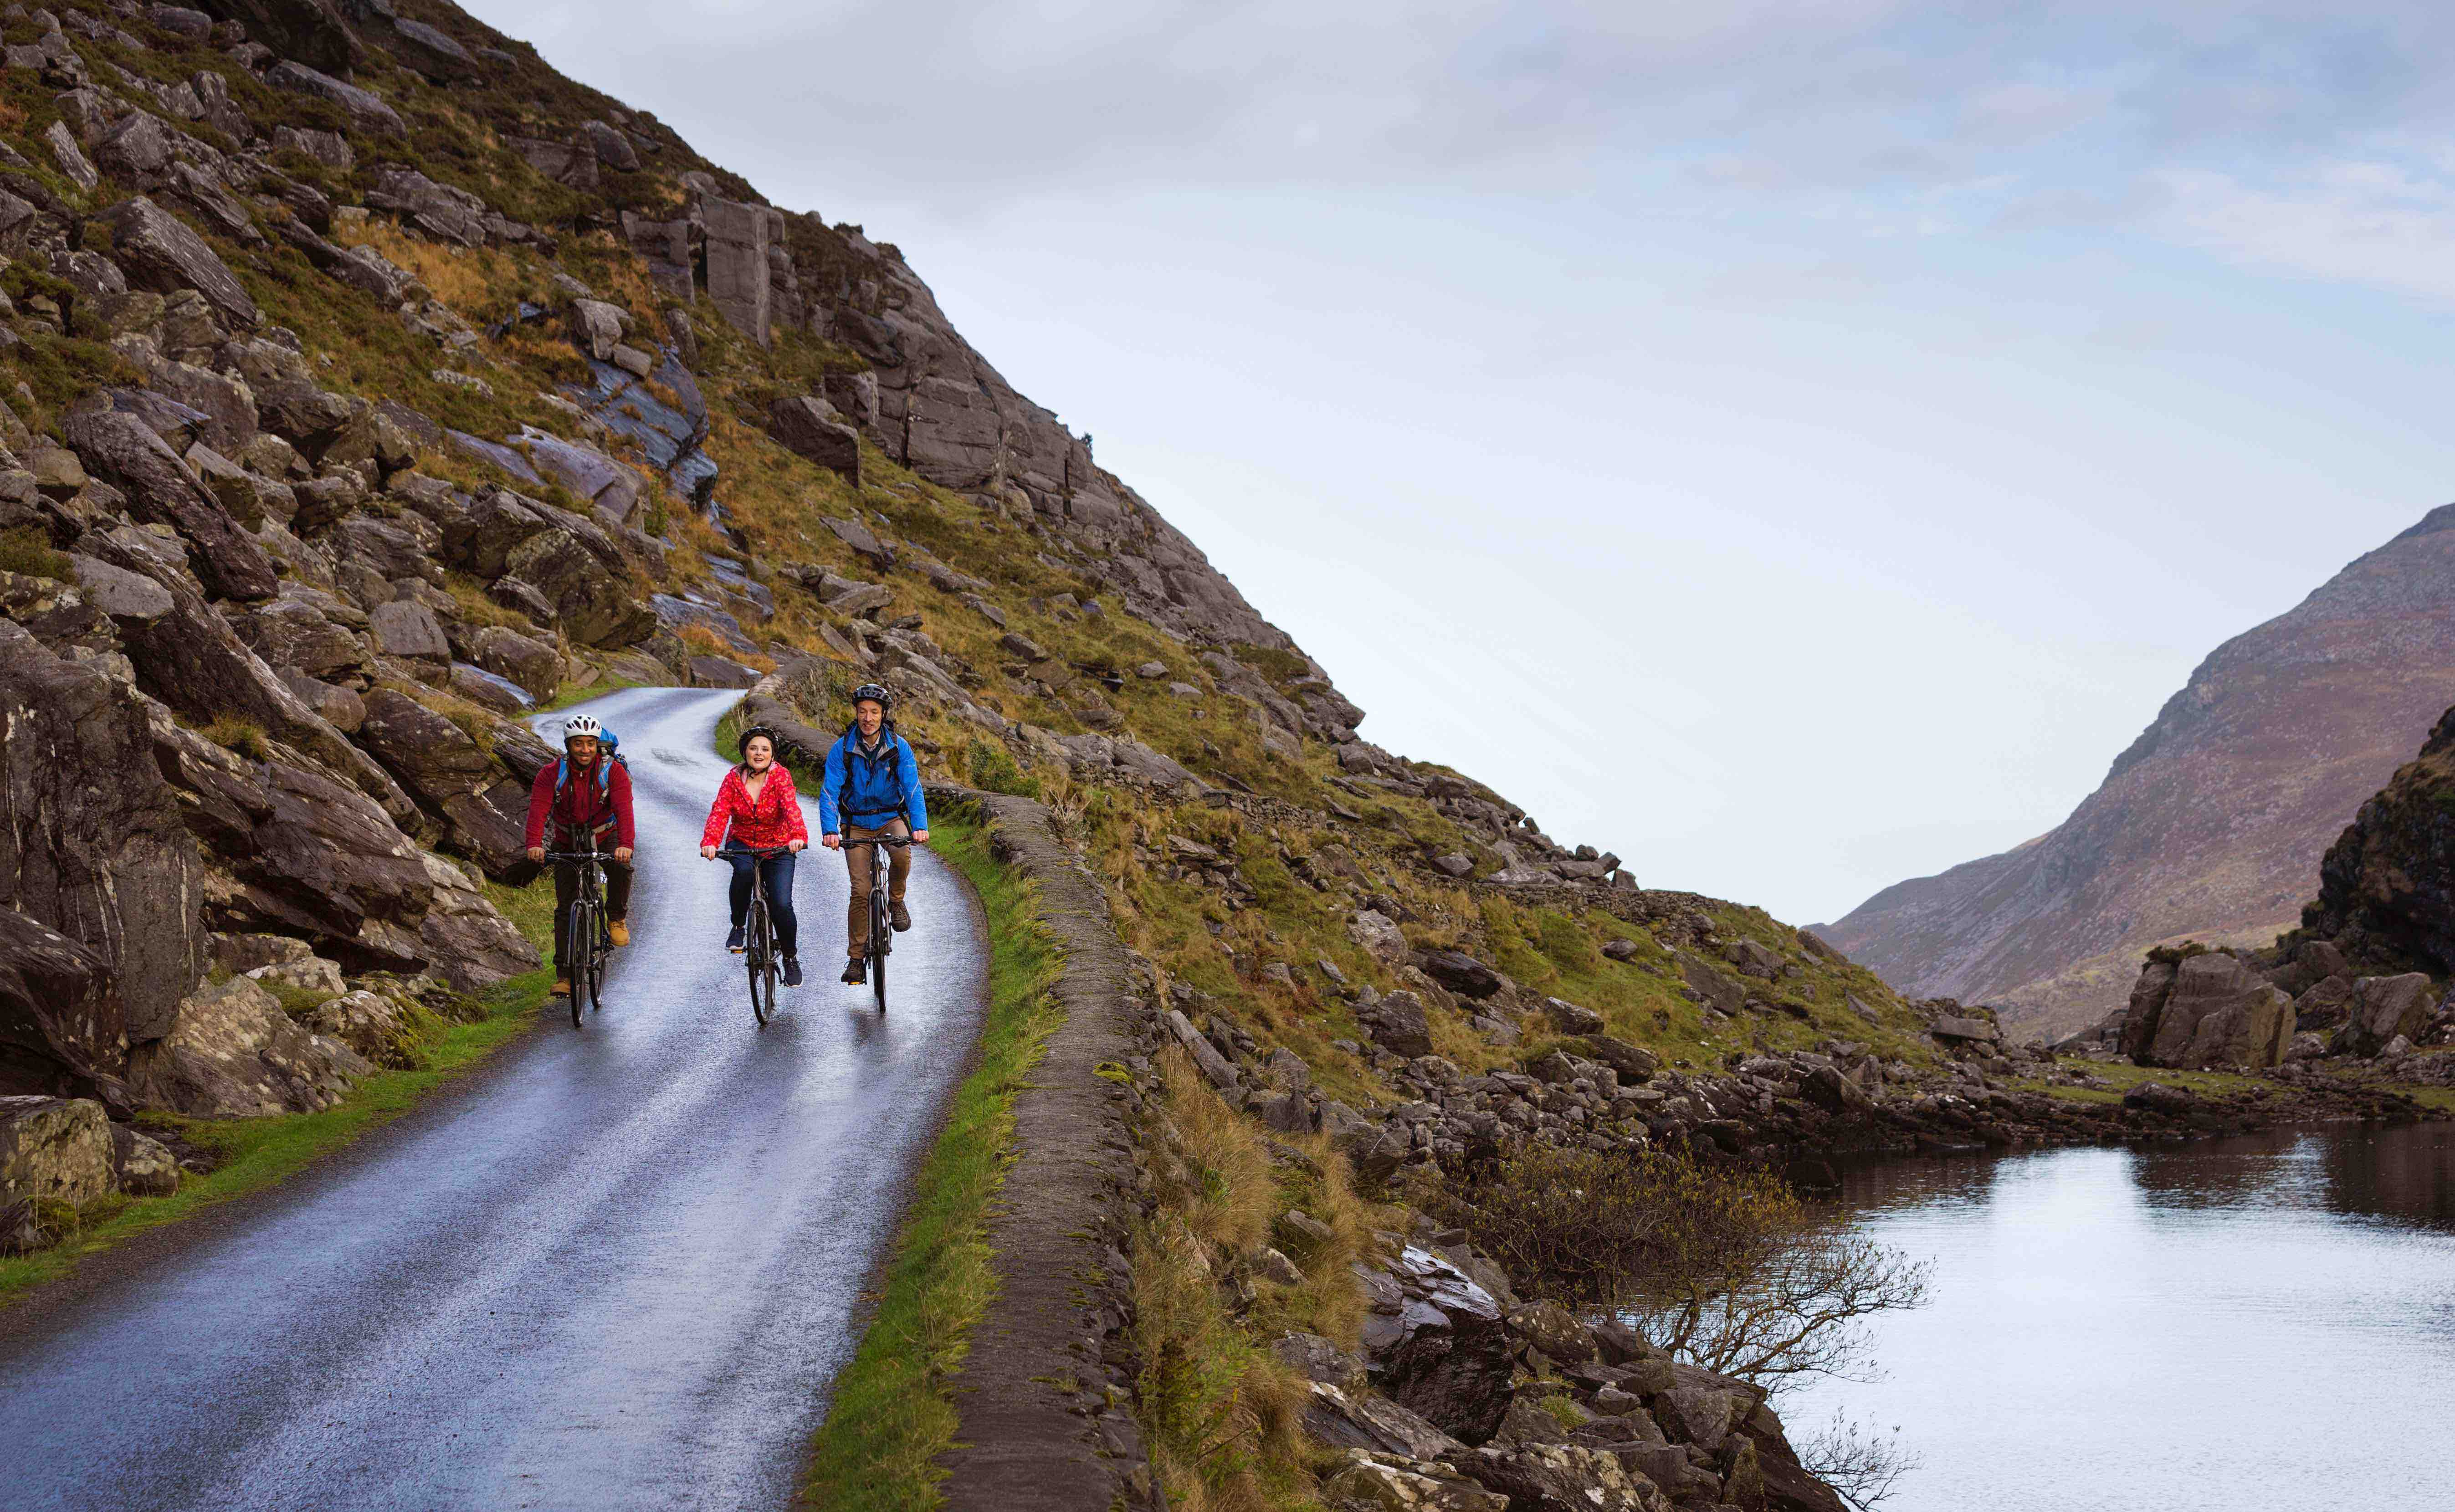 Cyclists in the Gap of Dunloe